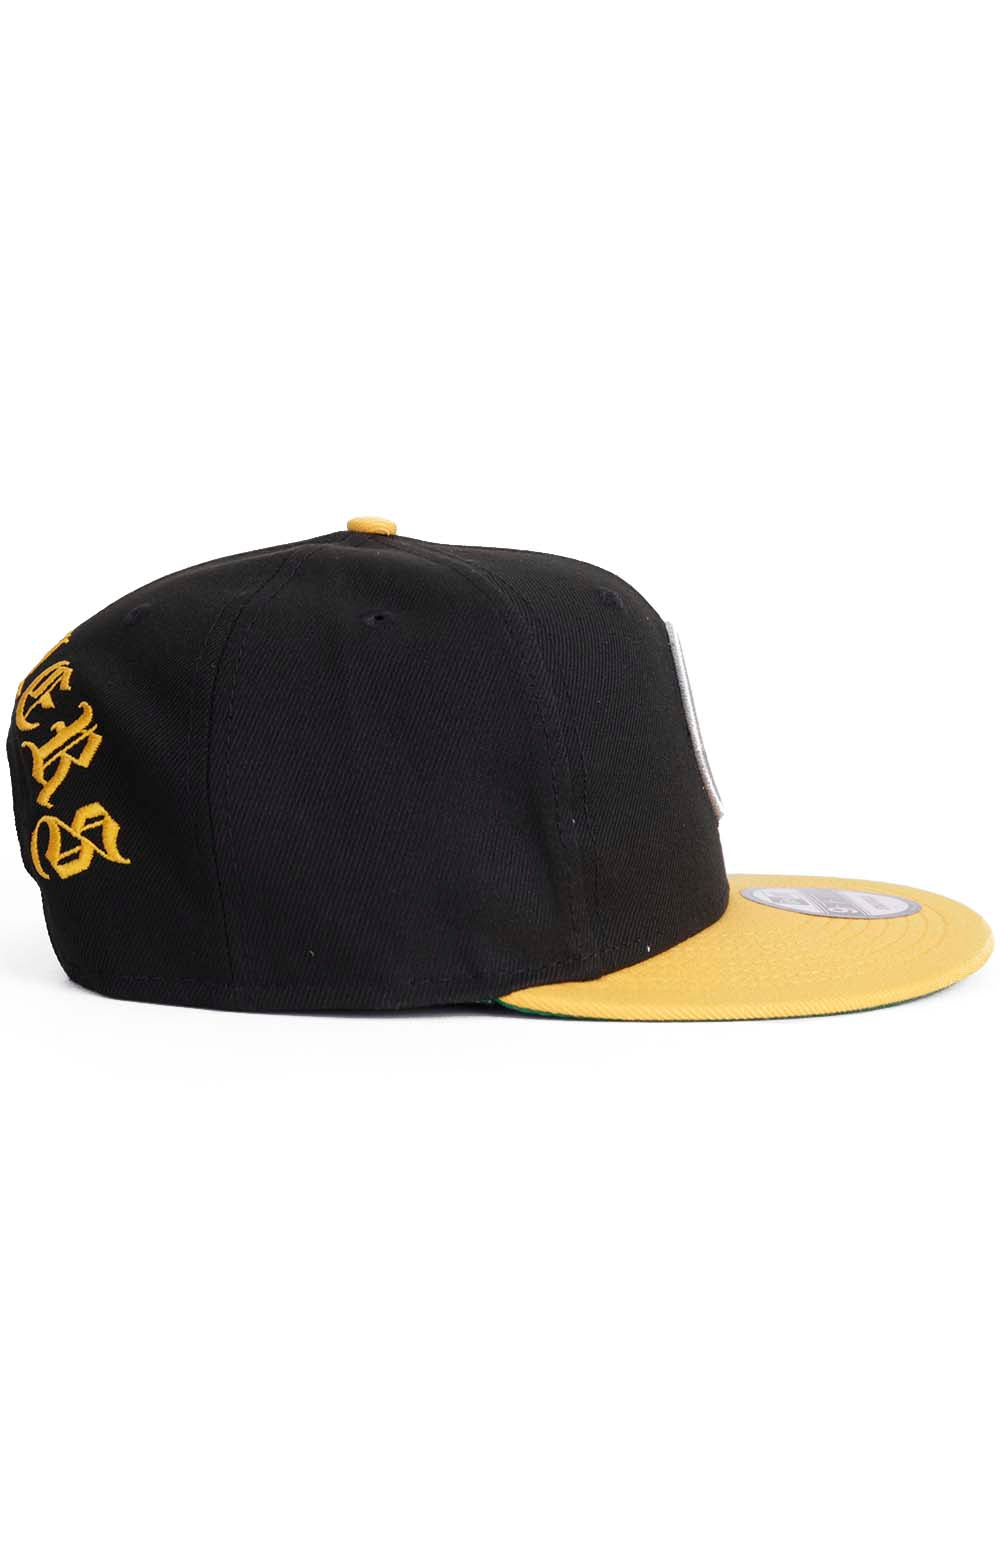 Pittsburgh Steelers Backletter Arch 950 Snap-Back Hat